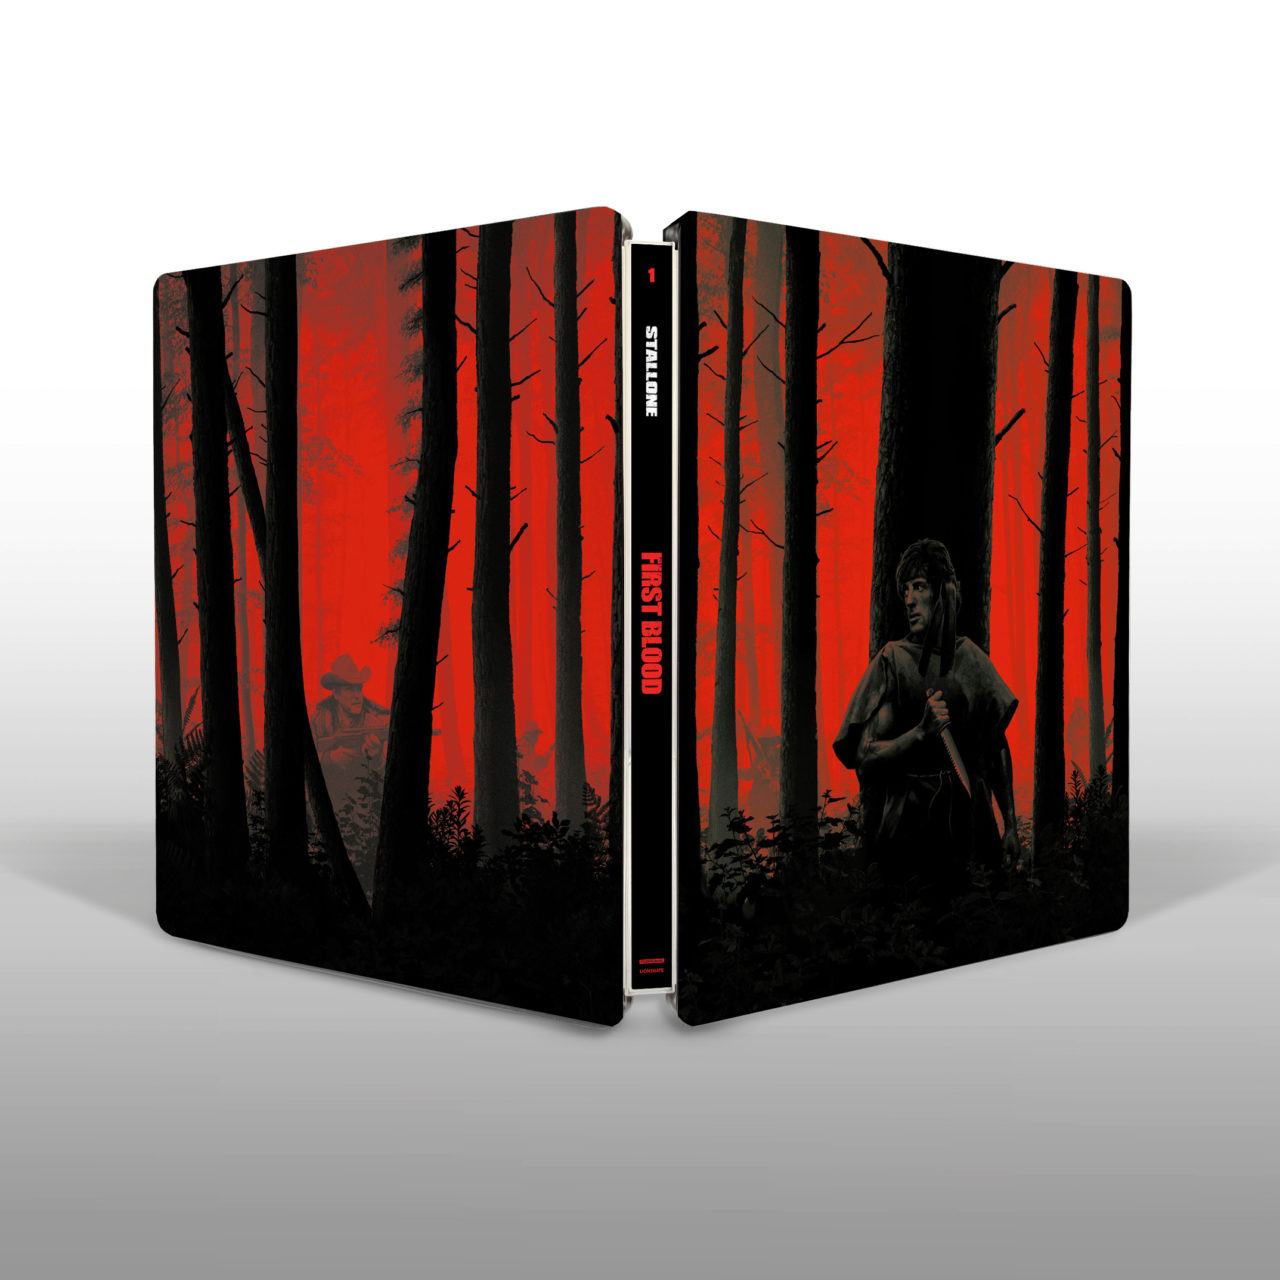 Rambo The Complete Steelbook Collection cover (Lionsgate Home Entertainment)